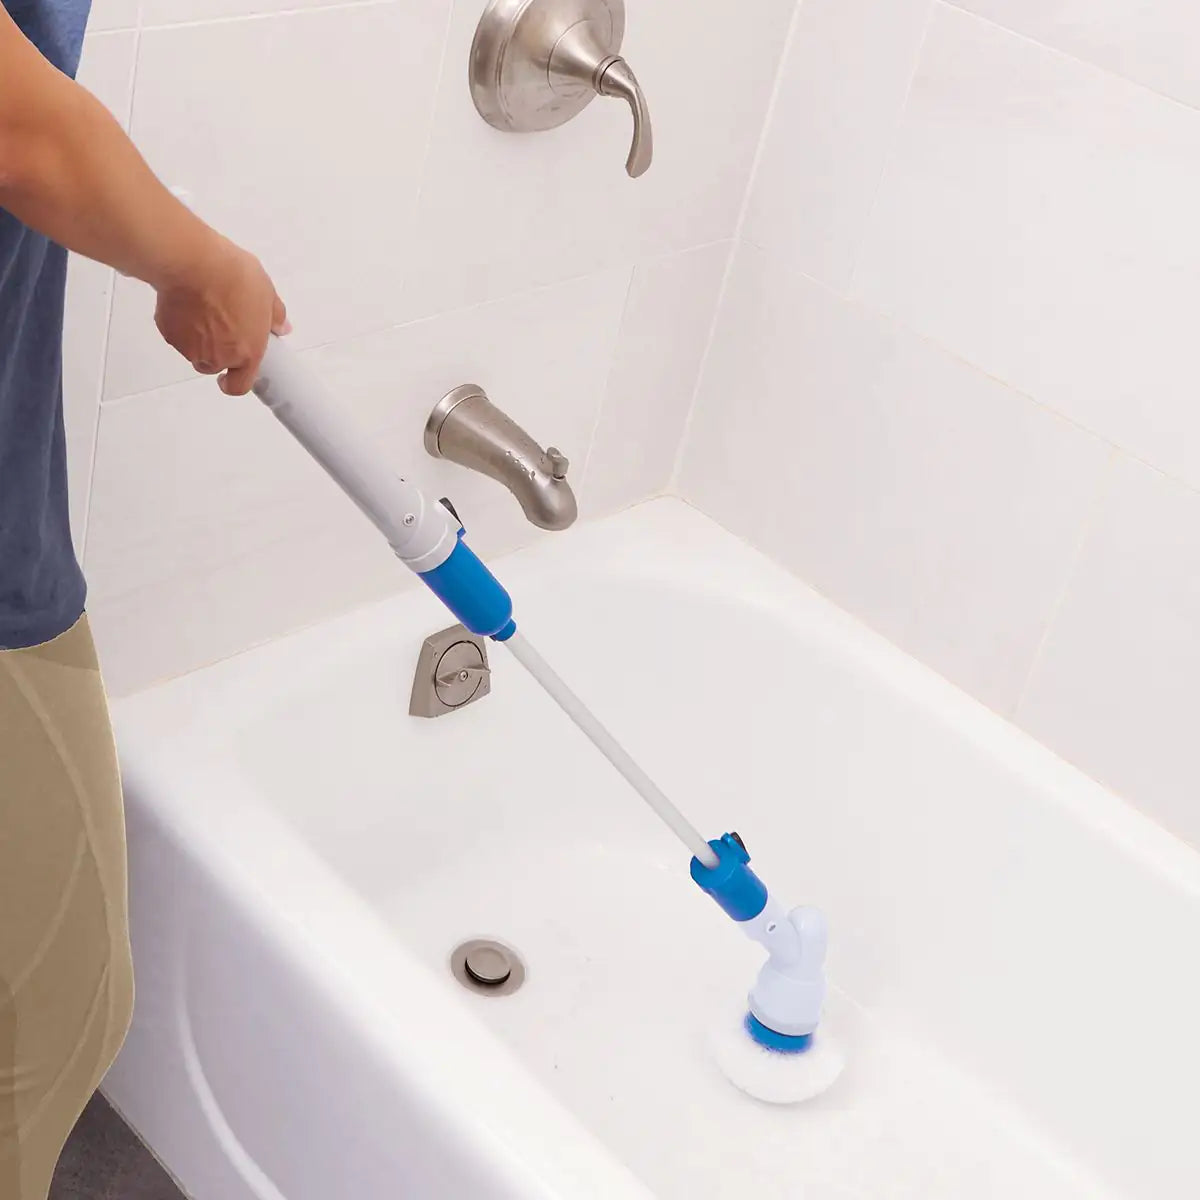 JML Hurricane Spin Scrubber The Reach Anywhere Cordless Electric Scrubber - White &amp; Blue | V0827 from JML - DID Electrical